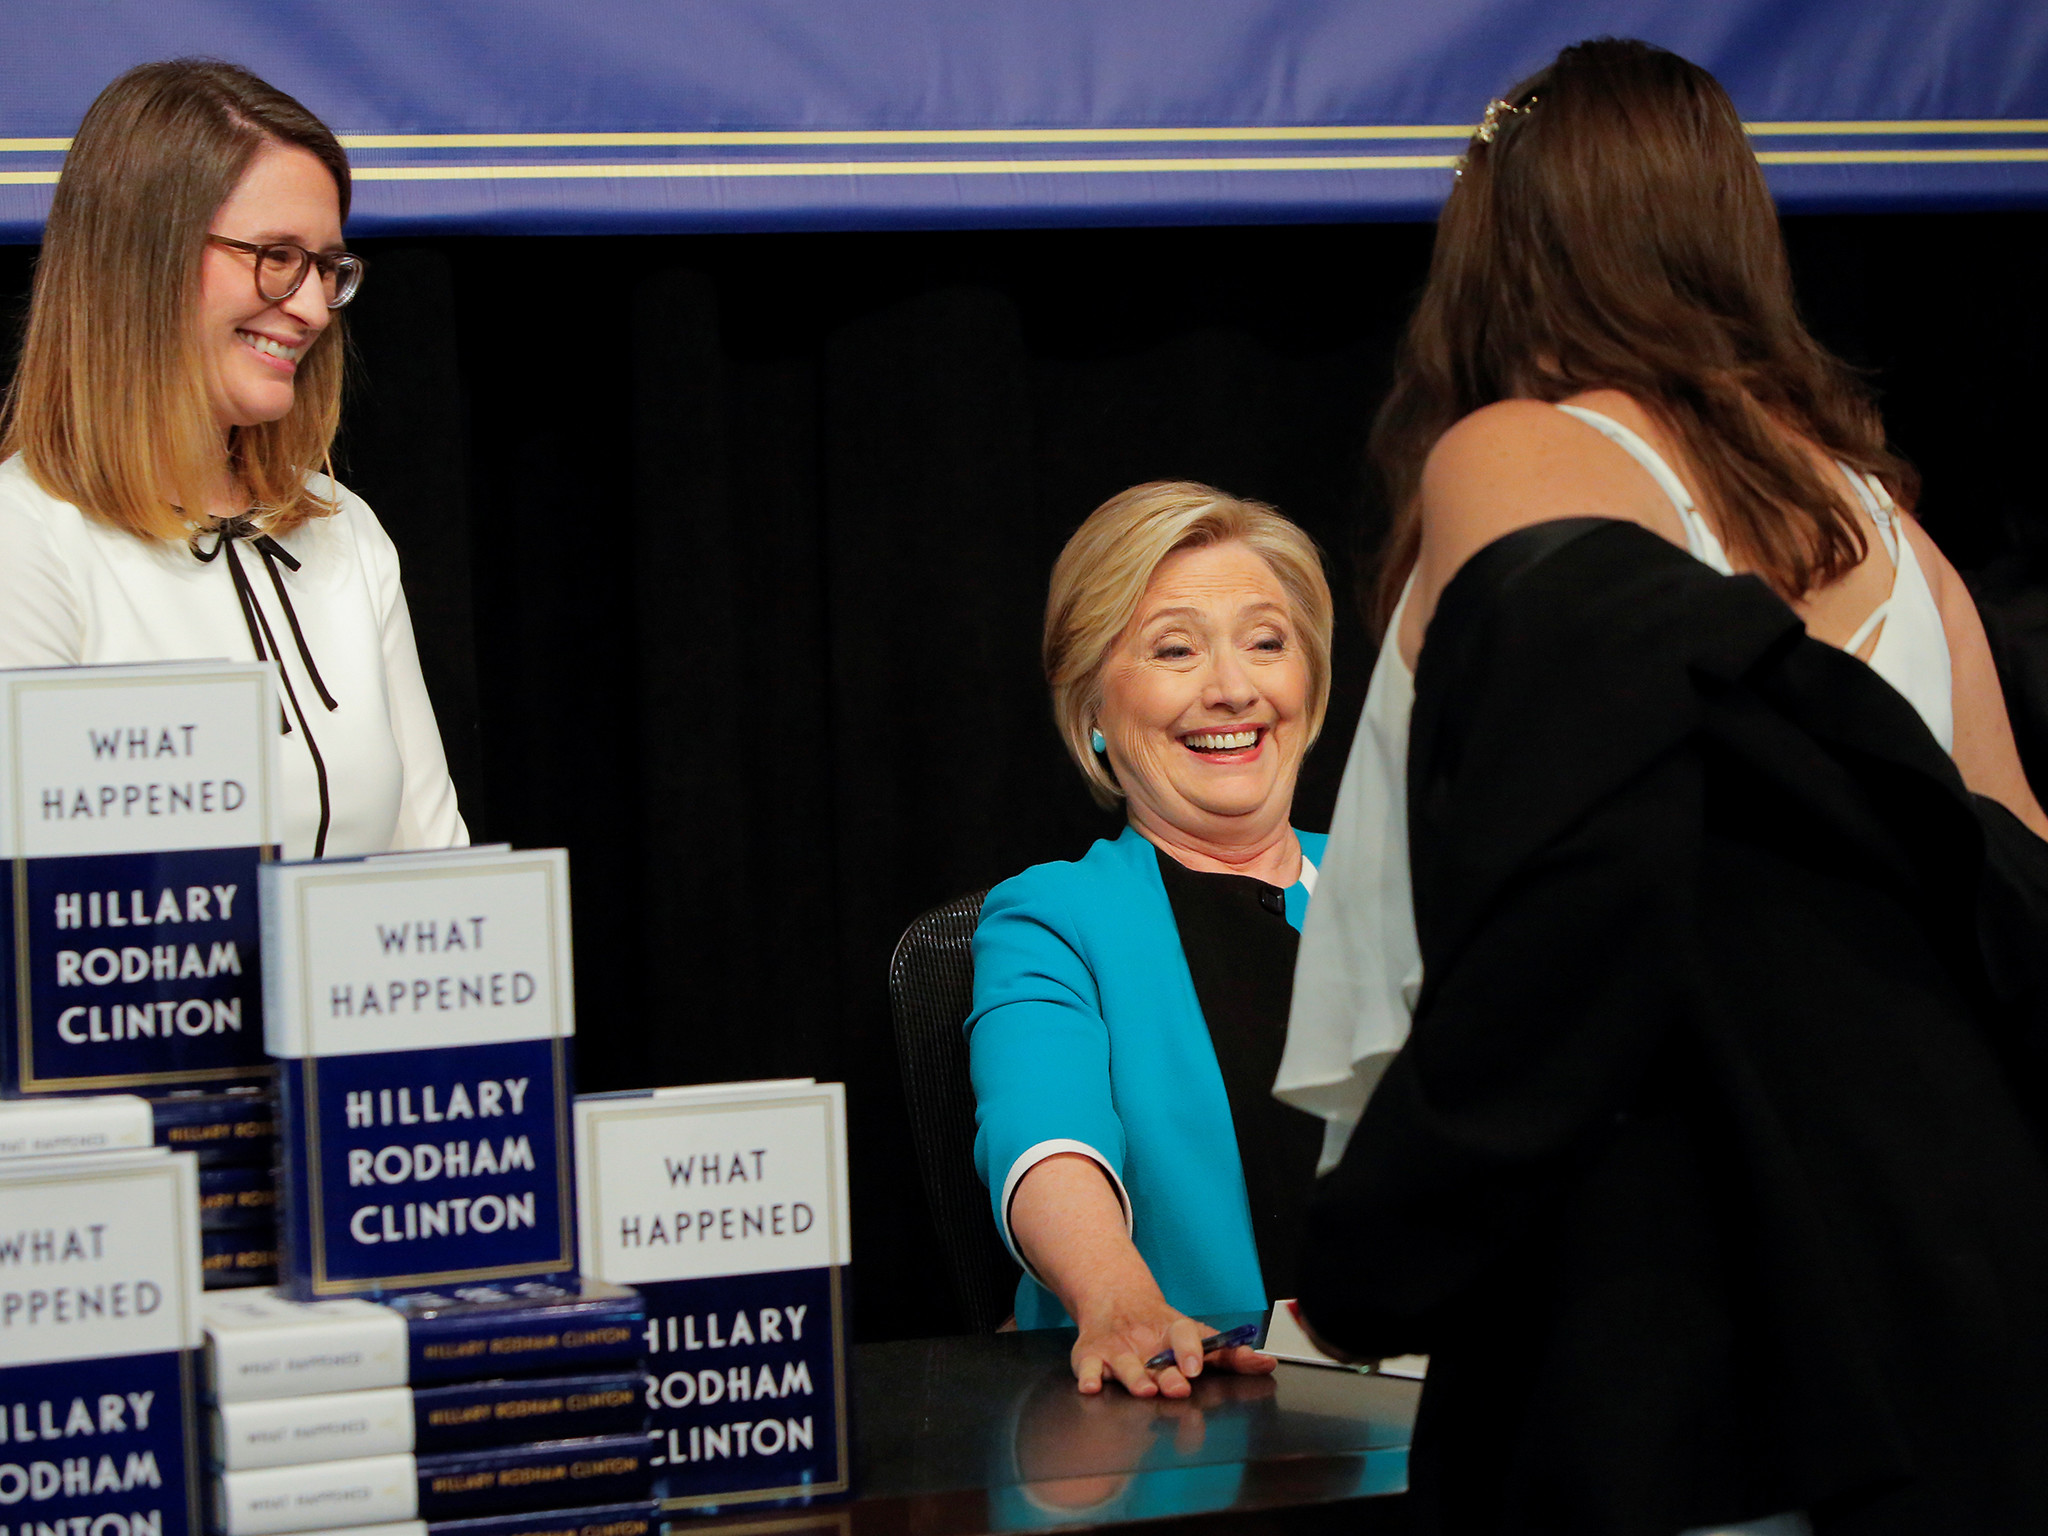 2048x1536 Hillary Clinton: First person in line at book signing is sorry he didn't  vote in 2016 | The Independent